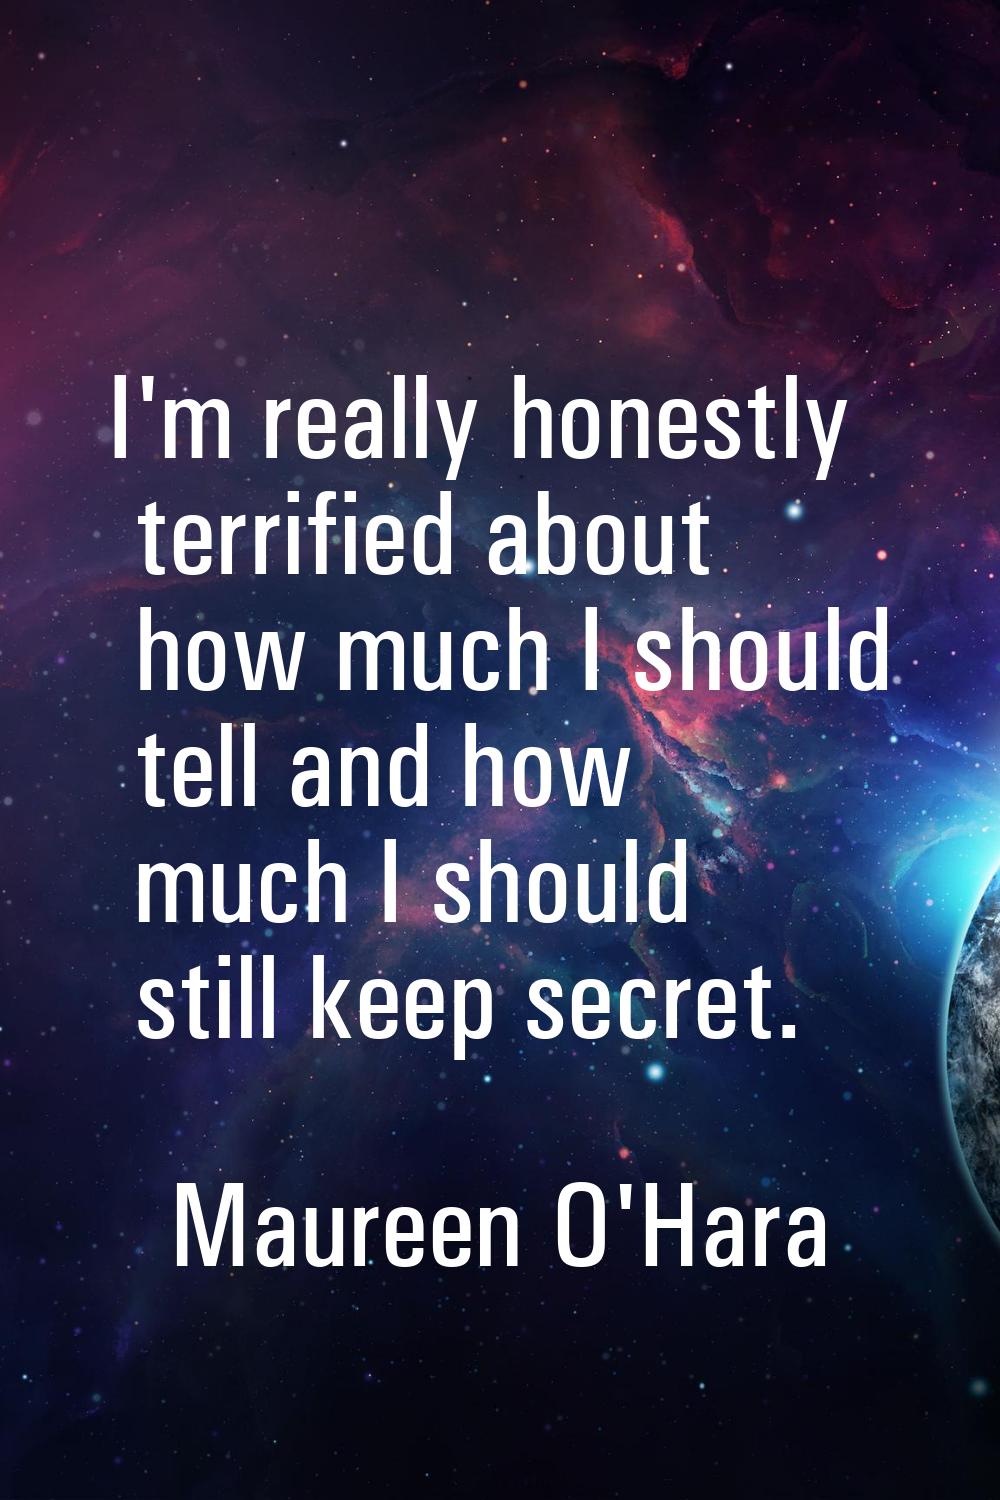 I'm really honestly terrified about how much I should tell and how much I should still keep secret.